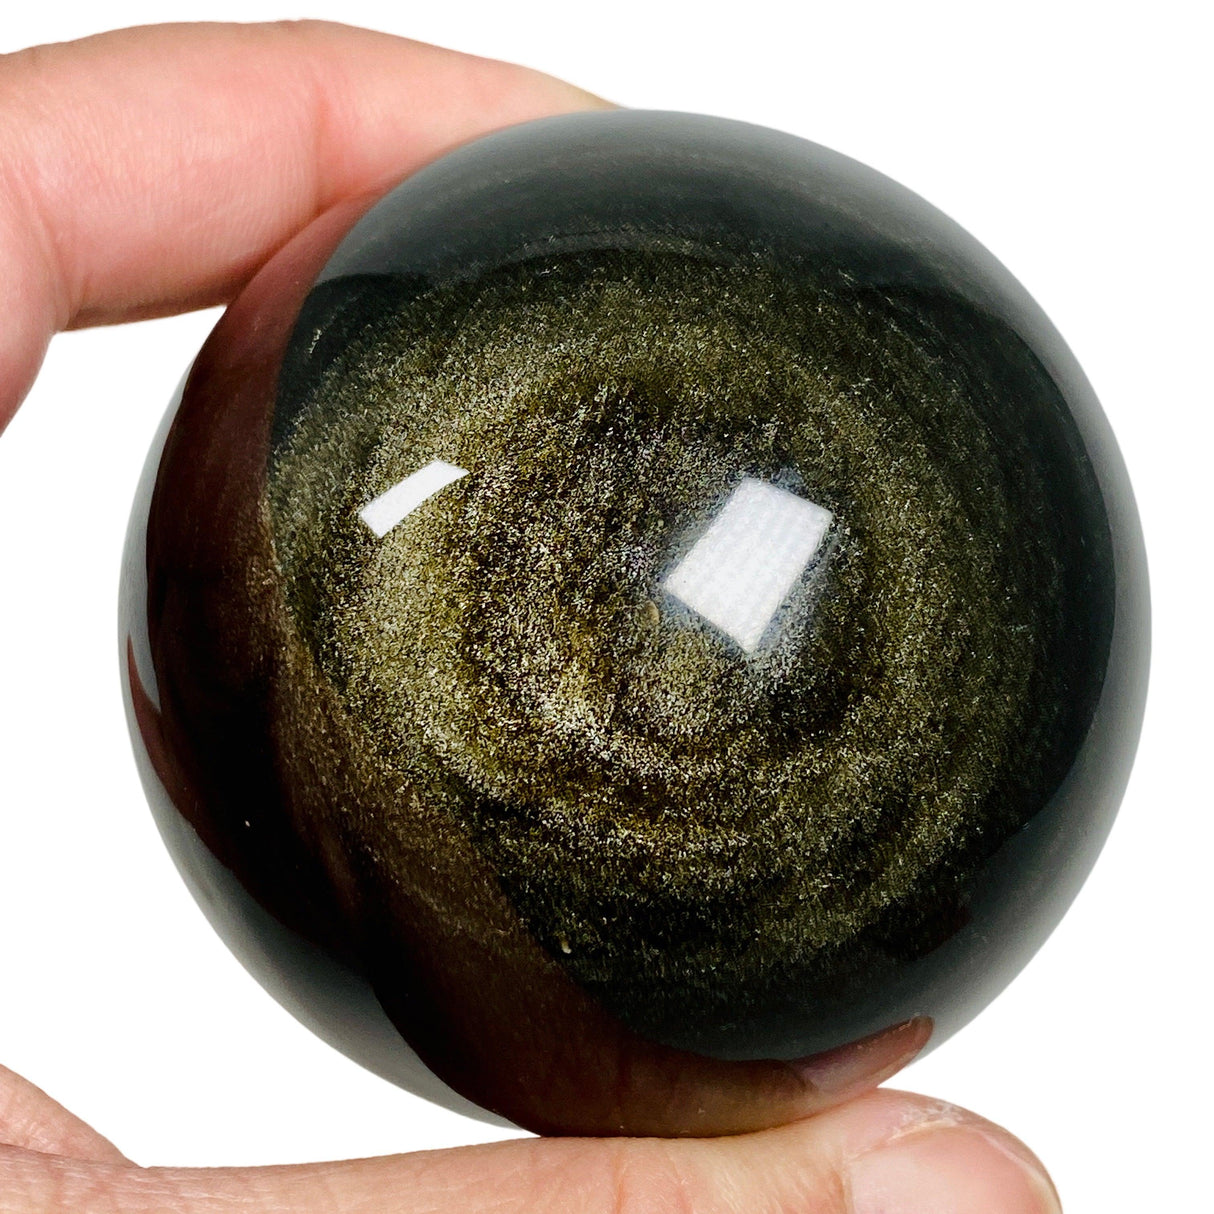 Obsidian Sphere OS-03 - Nature's Magick